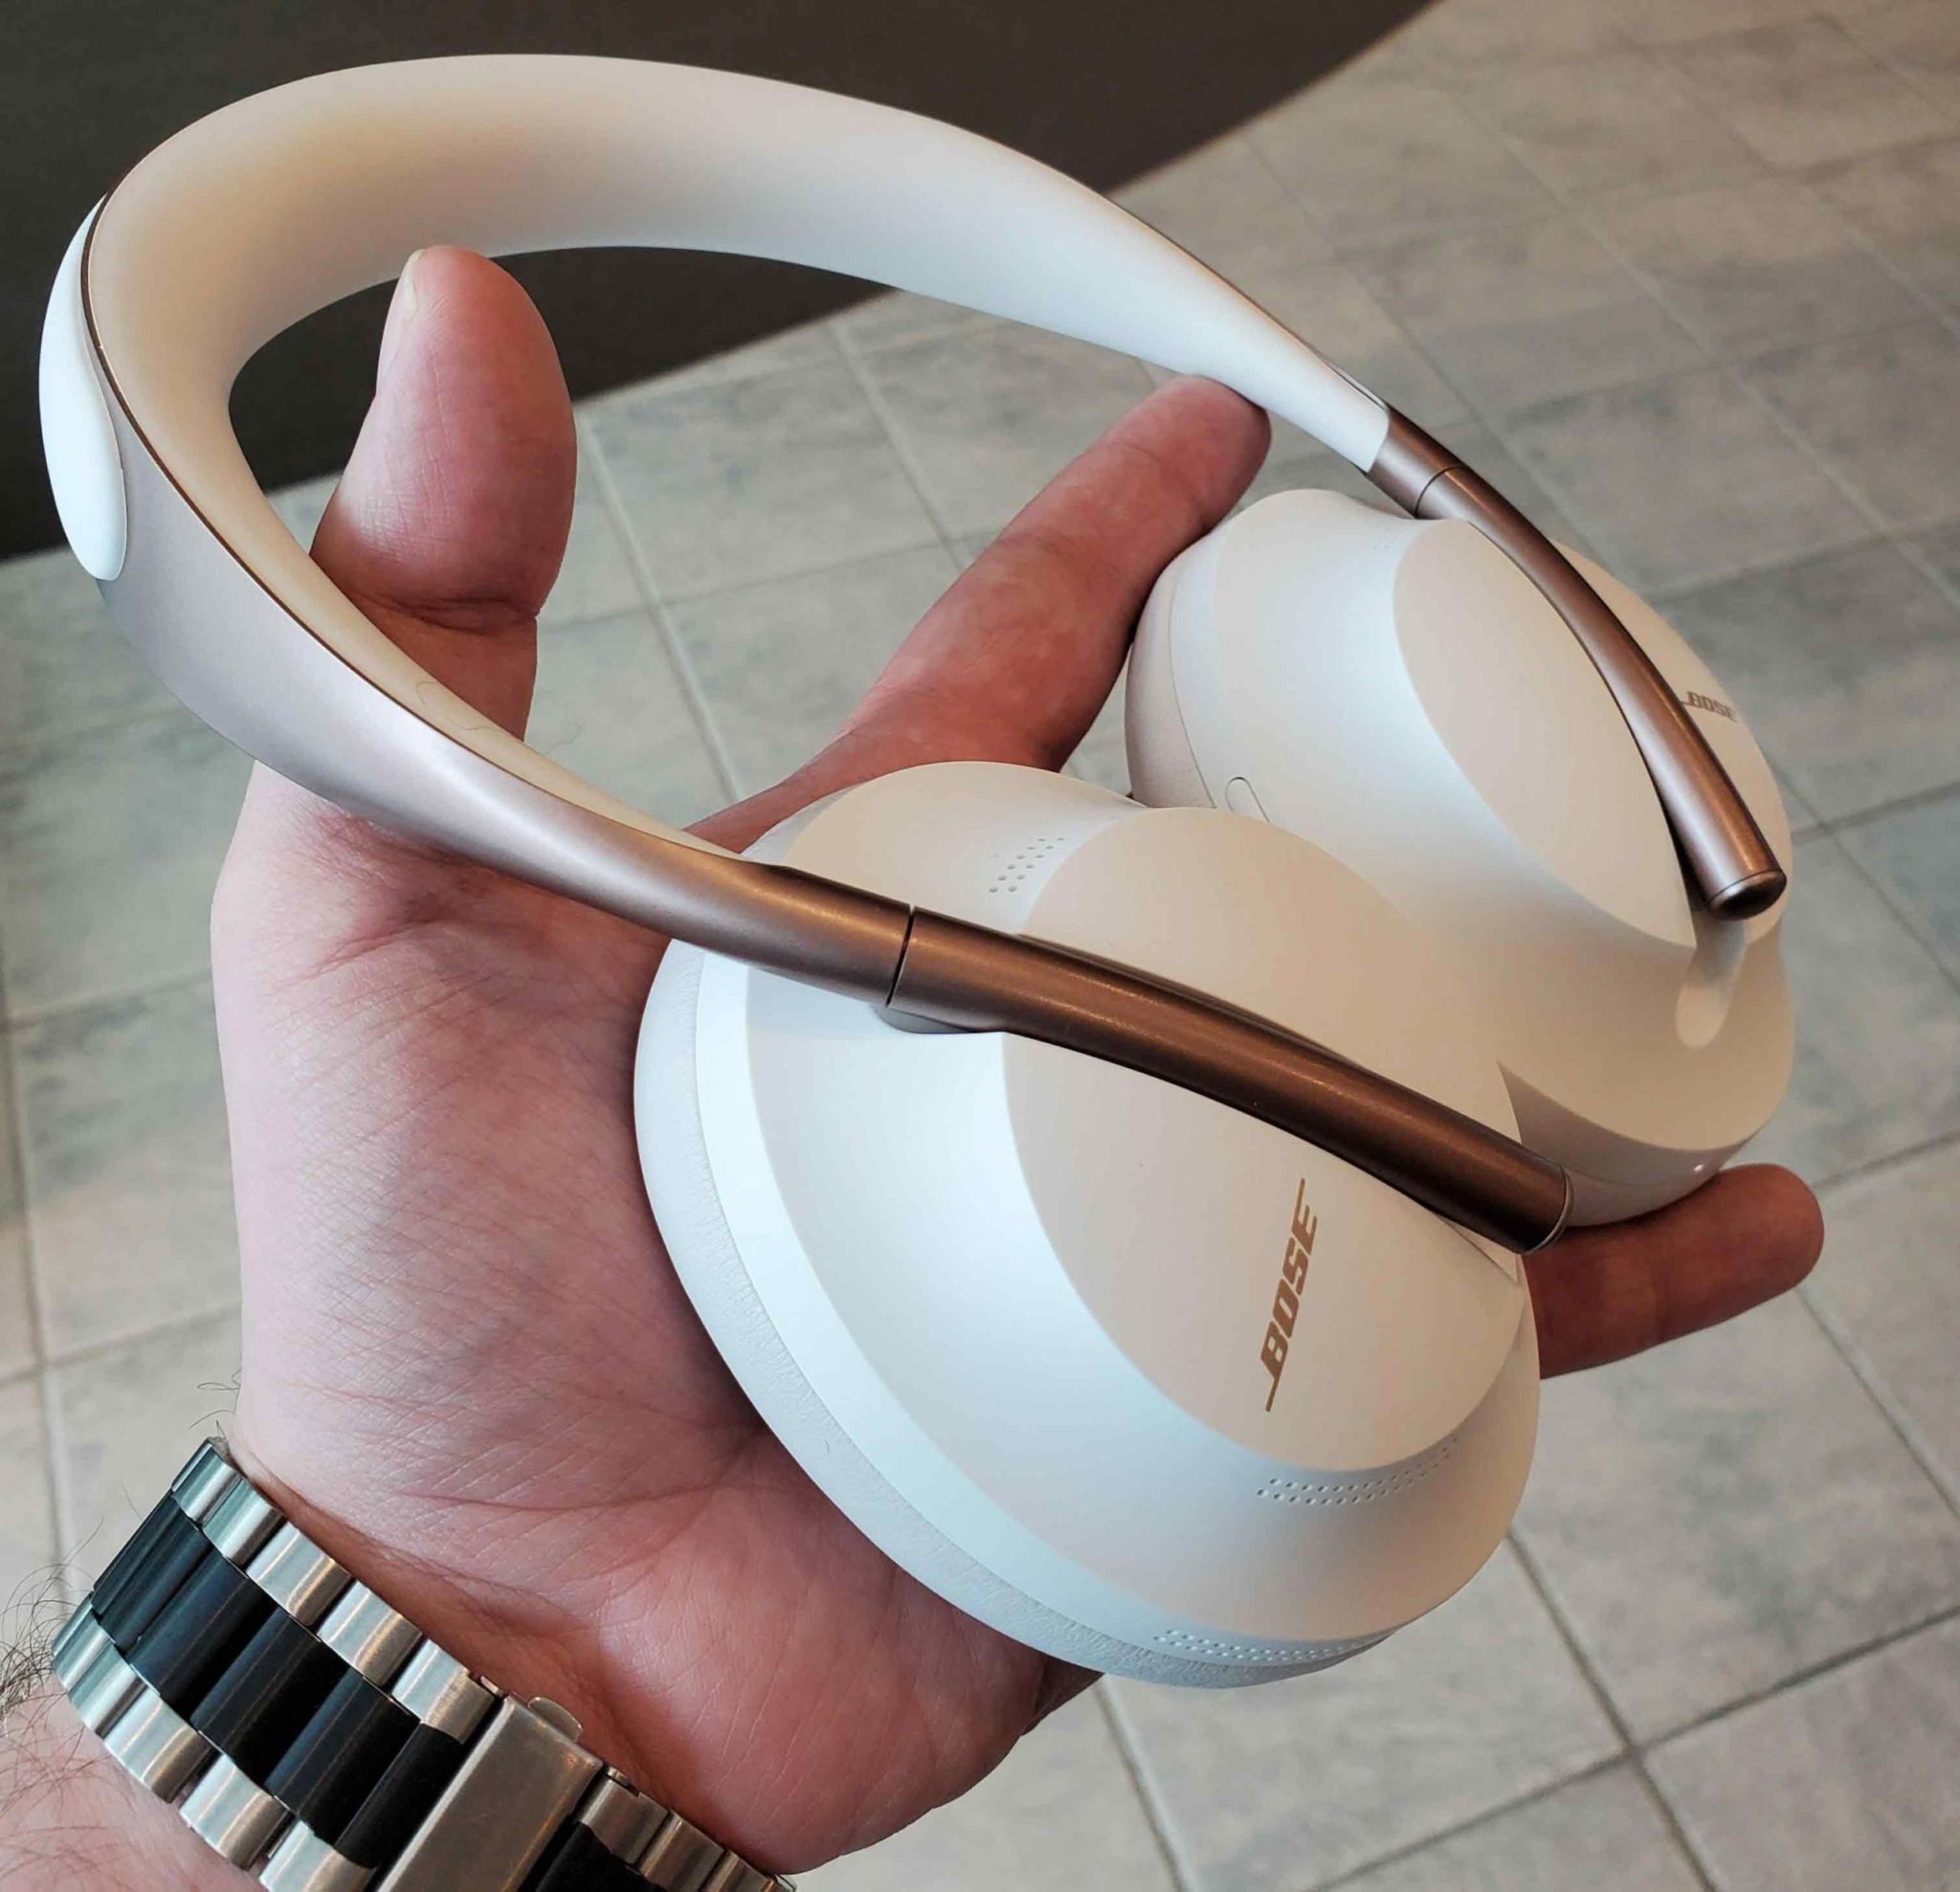 Bose launches SoapStone version for the Noise Cancelling 